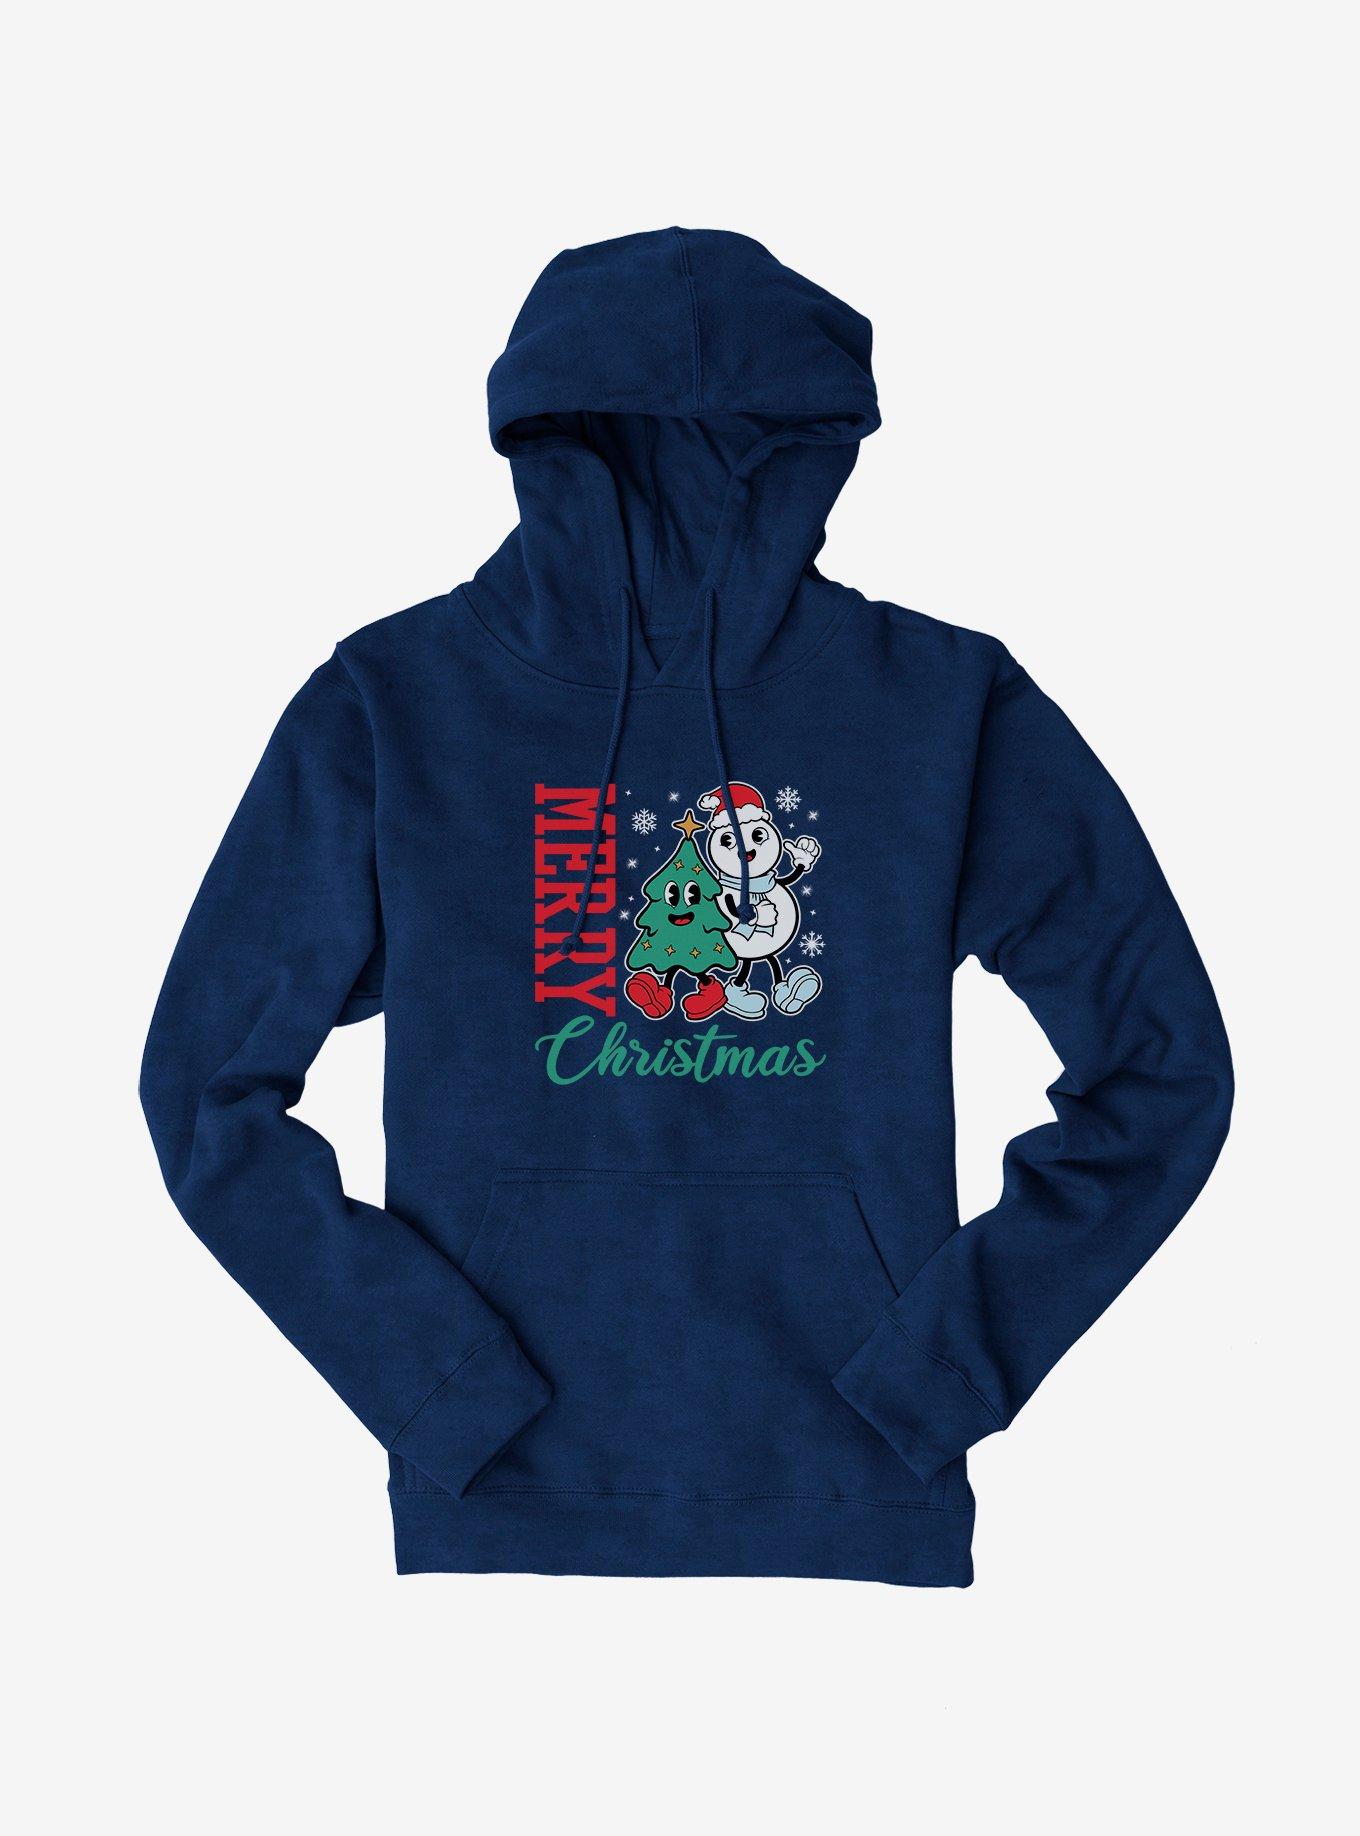 Hot Topic Merry Christmas Snowman And Tree Hoodie